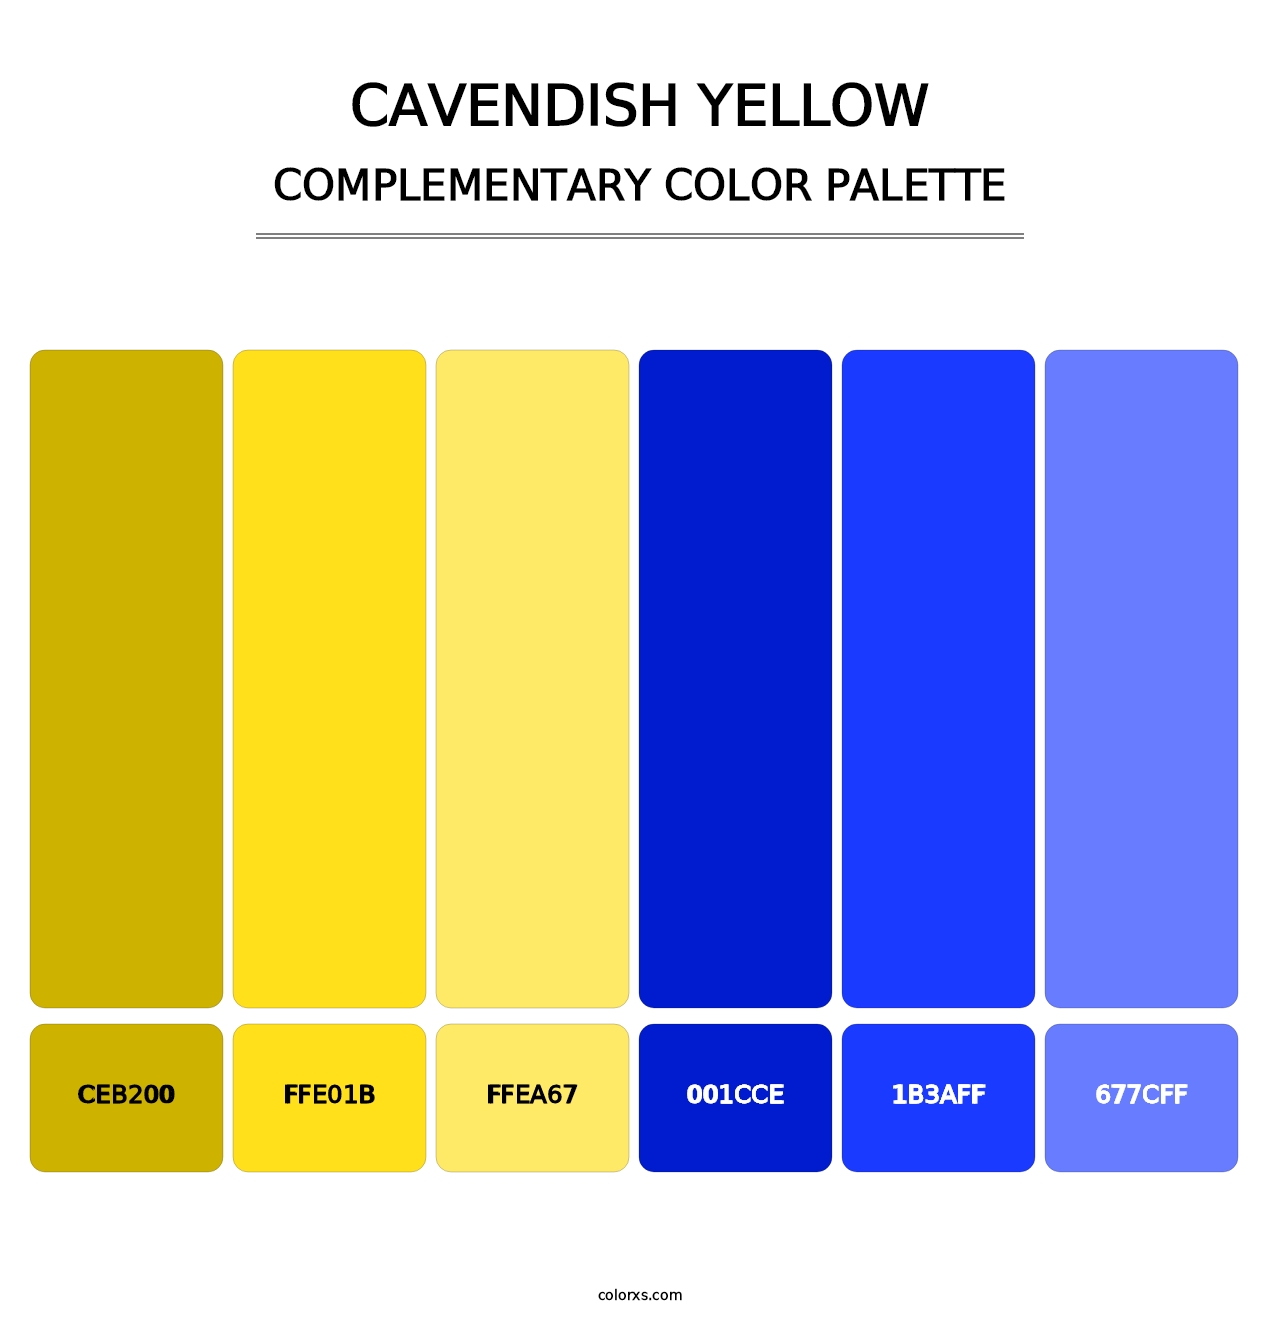 Cavendish Yellow - Complementary Color Palette